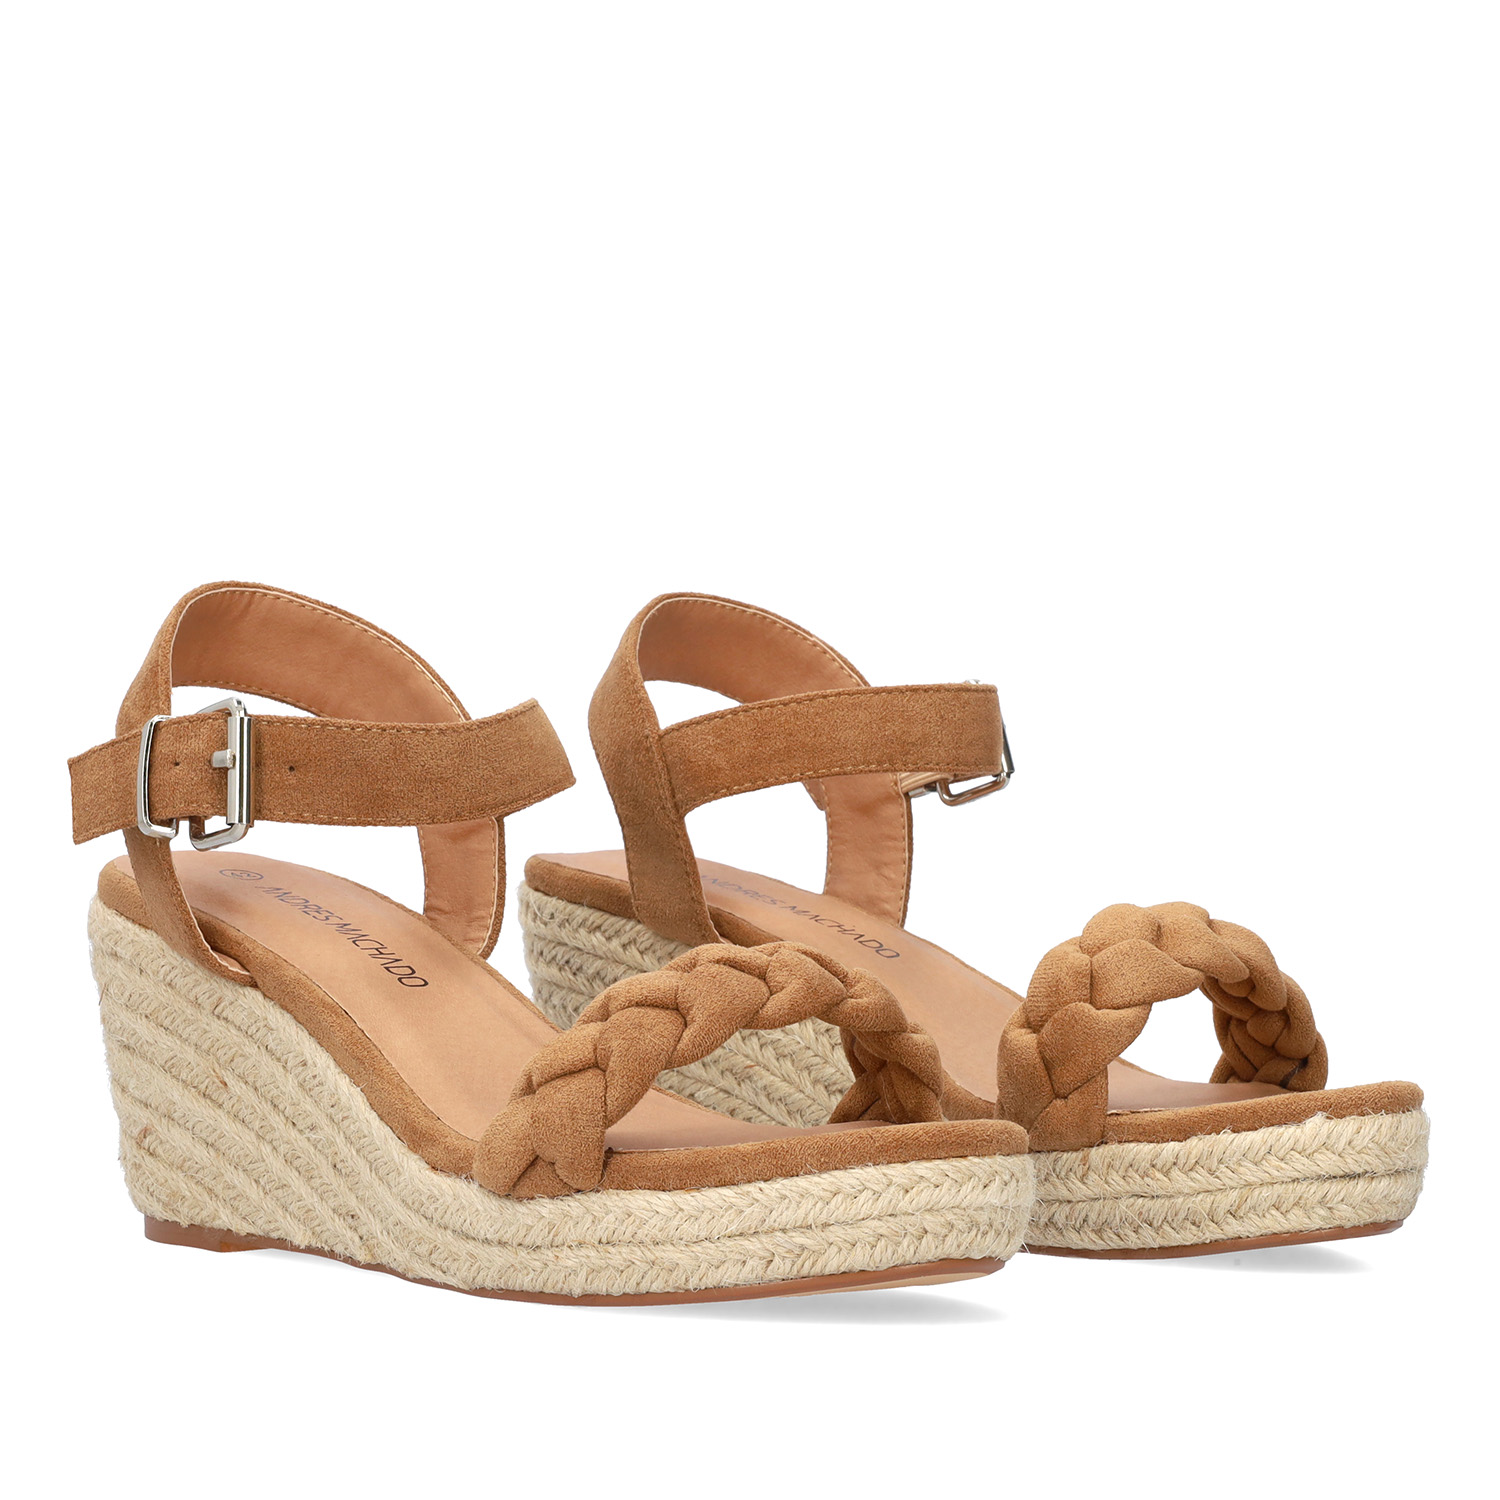 Brown faux suede sandal with a jute wedge 